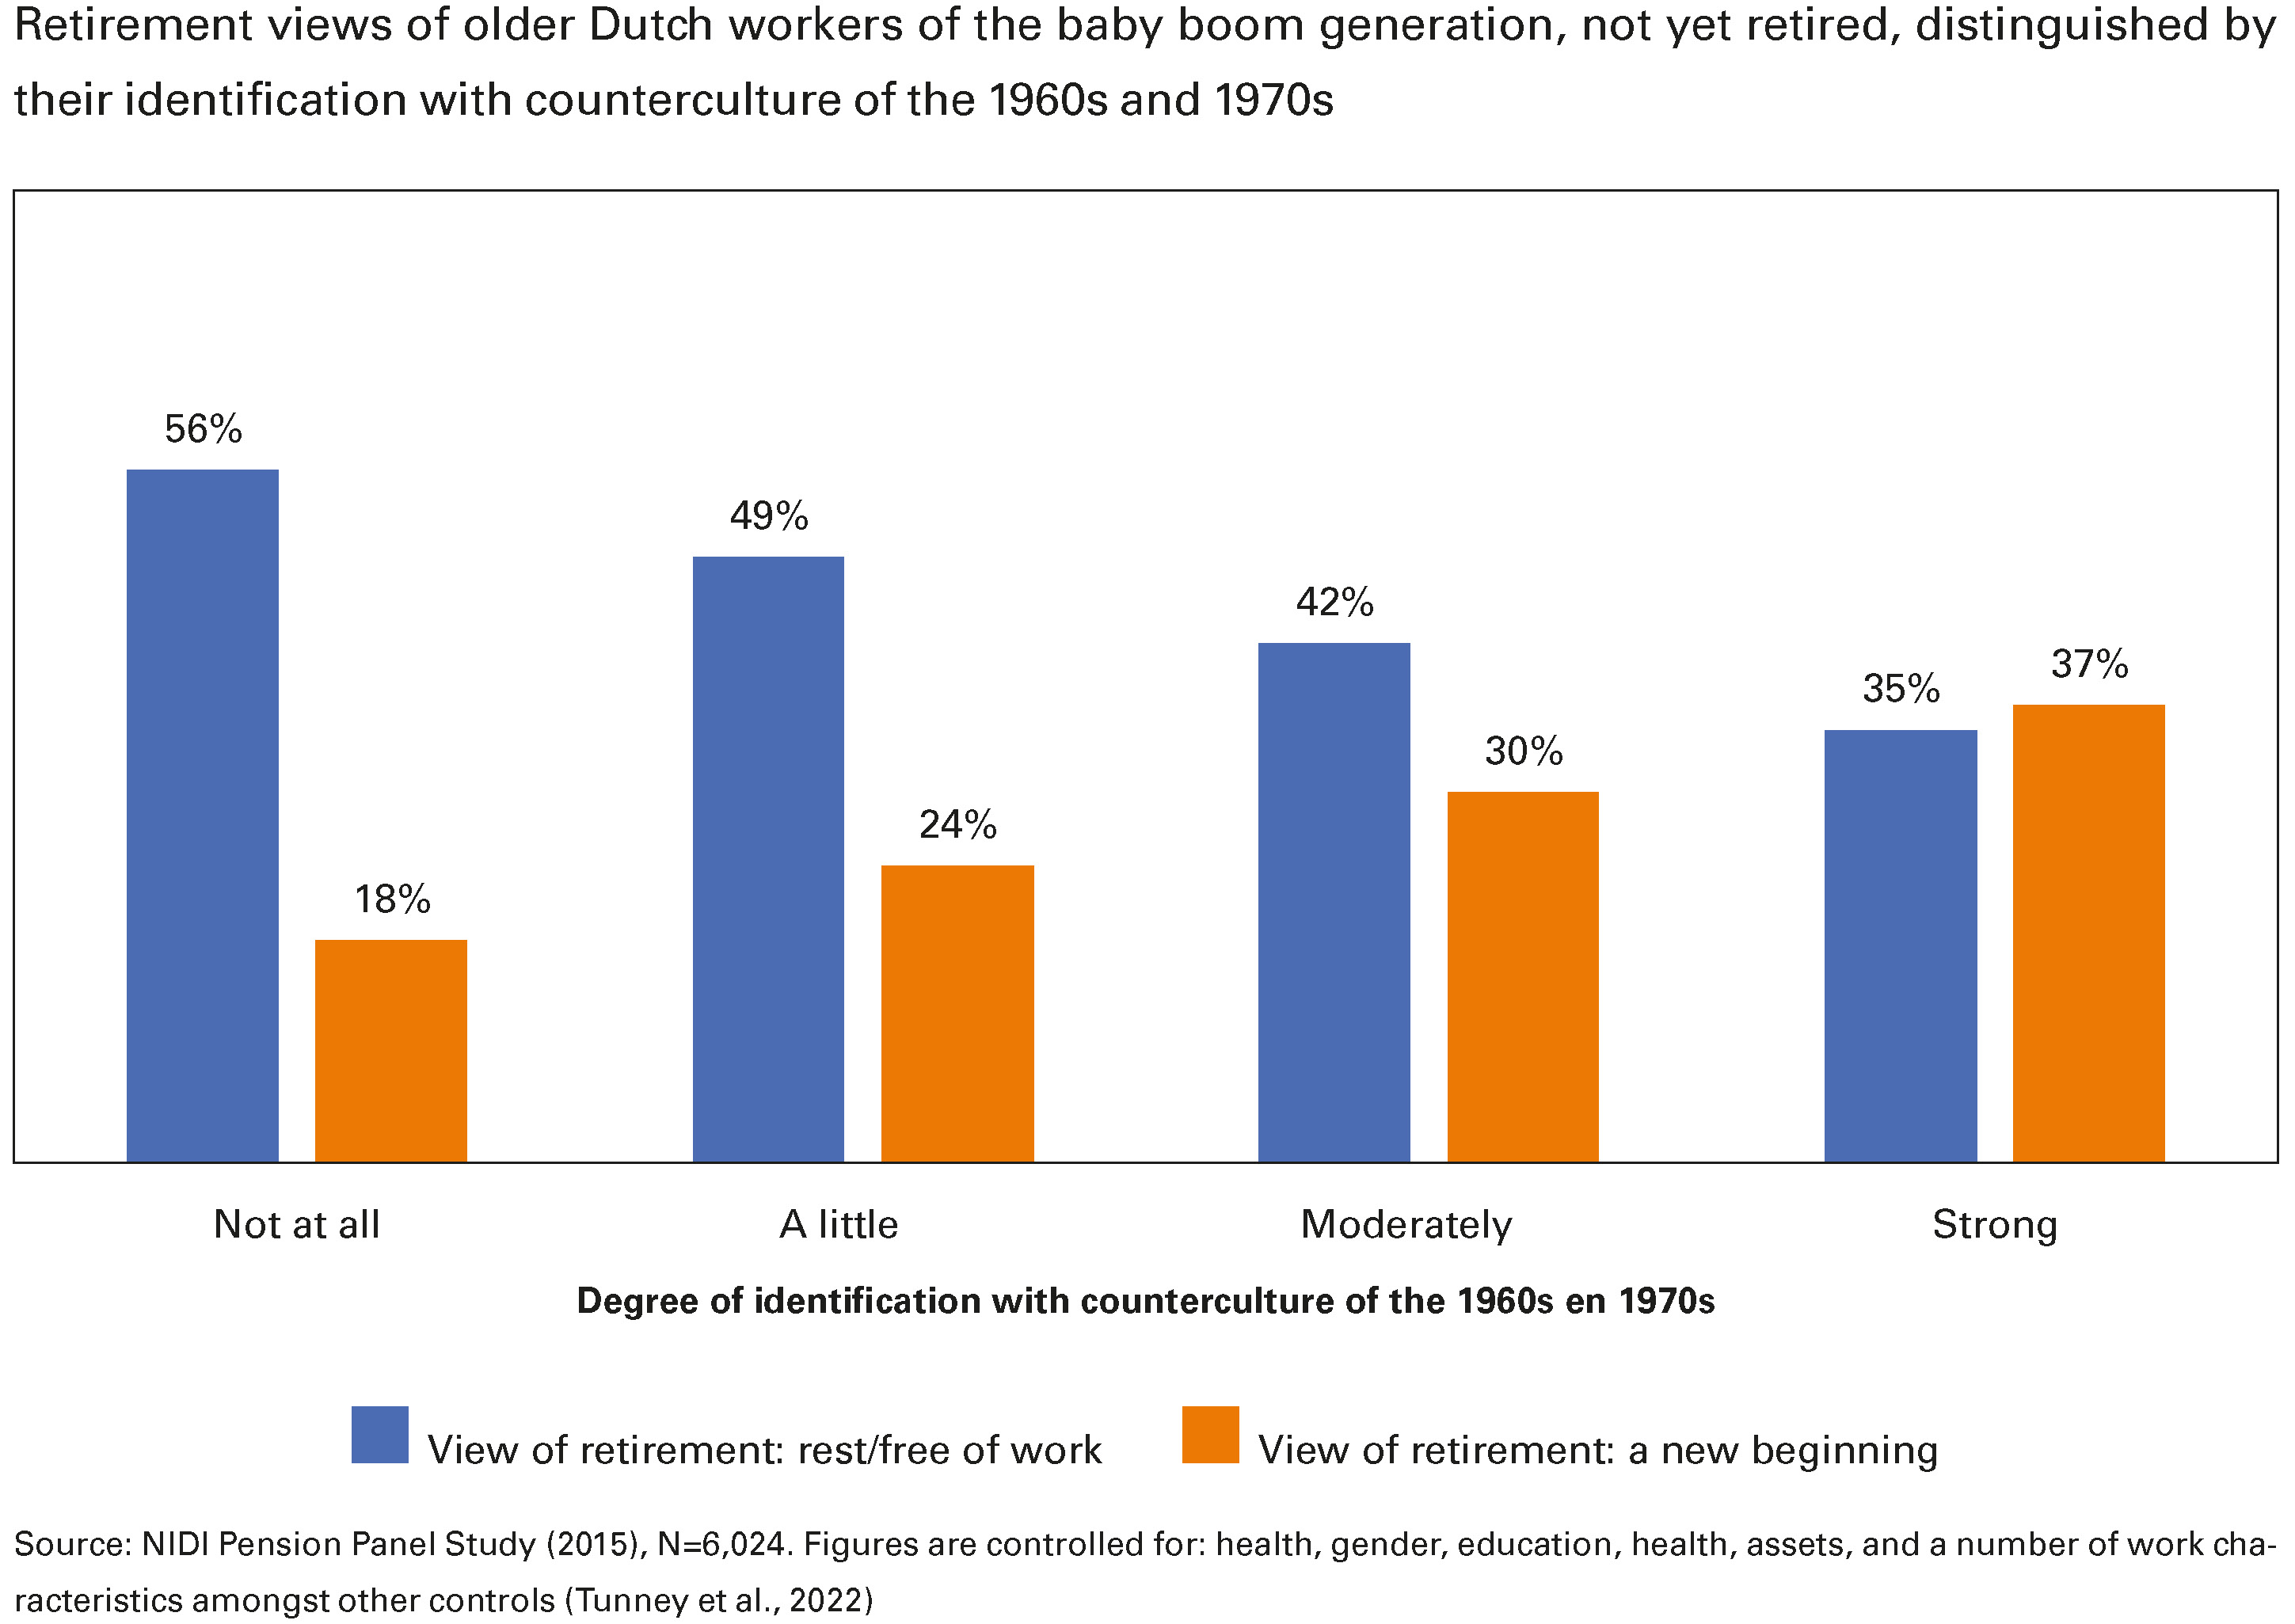 Retirement views of older Dutch workers of the baby boom generation, not yet retired, distinguished by their identification with counterculture of the 1960s and 1970s